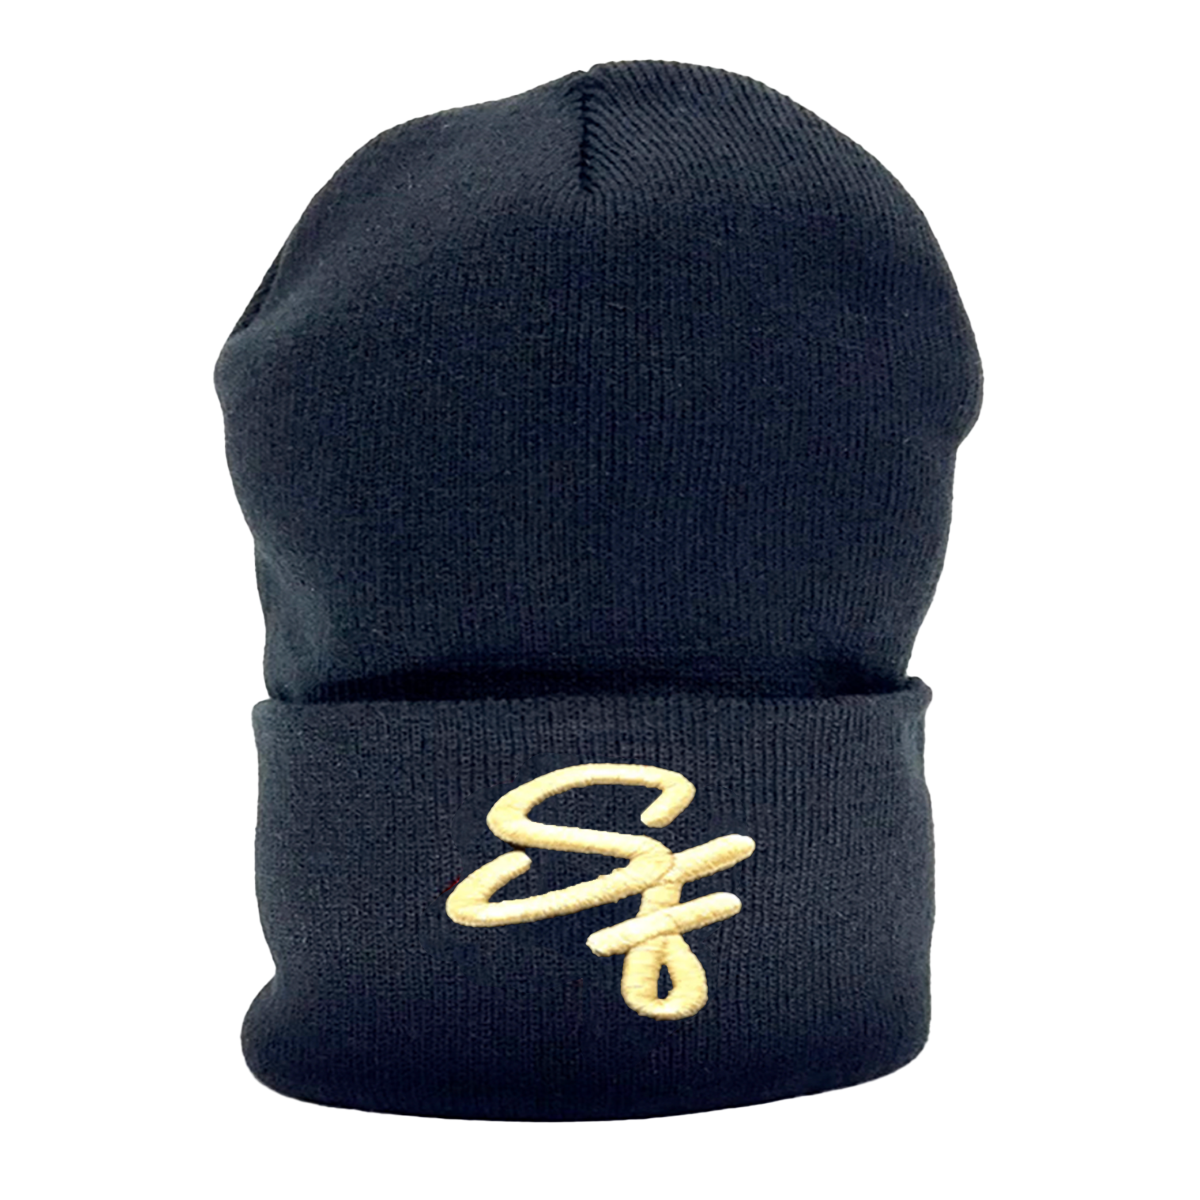 THE TWO EIGHTY BEANIE -